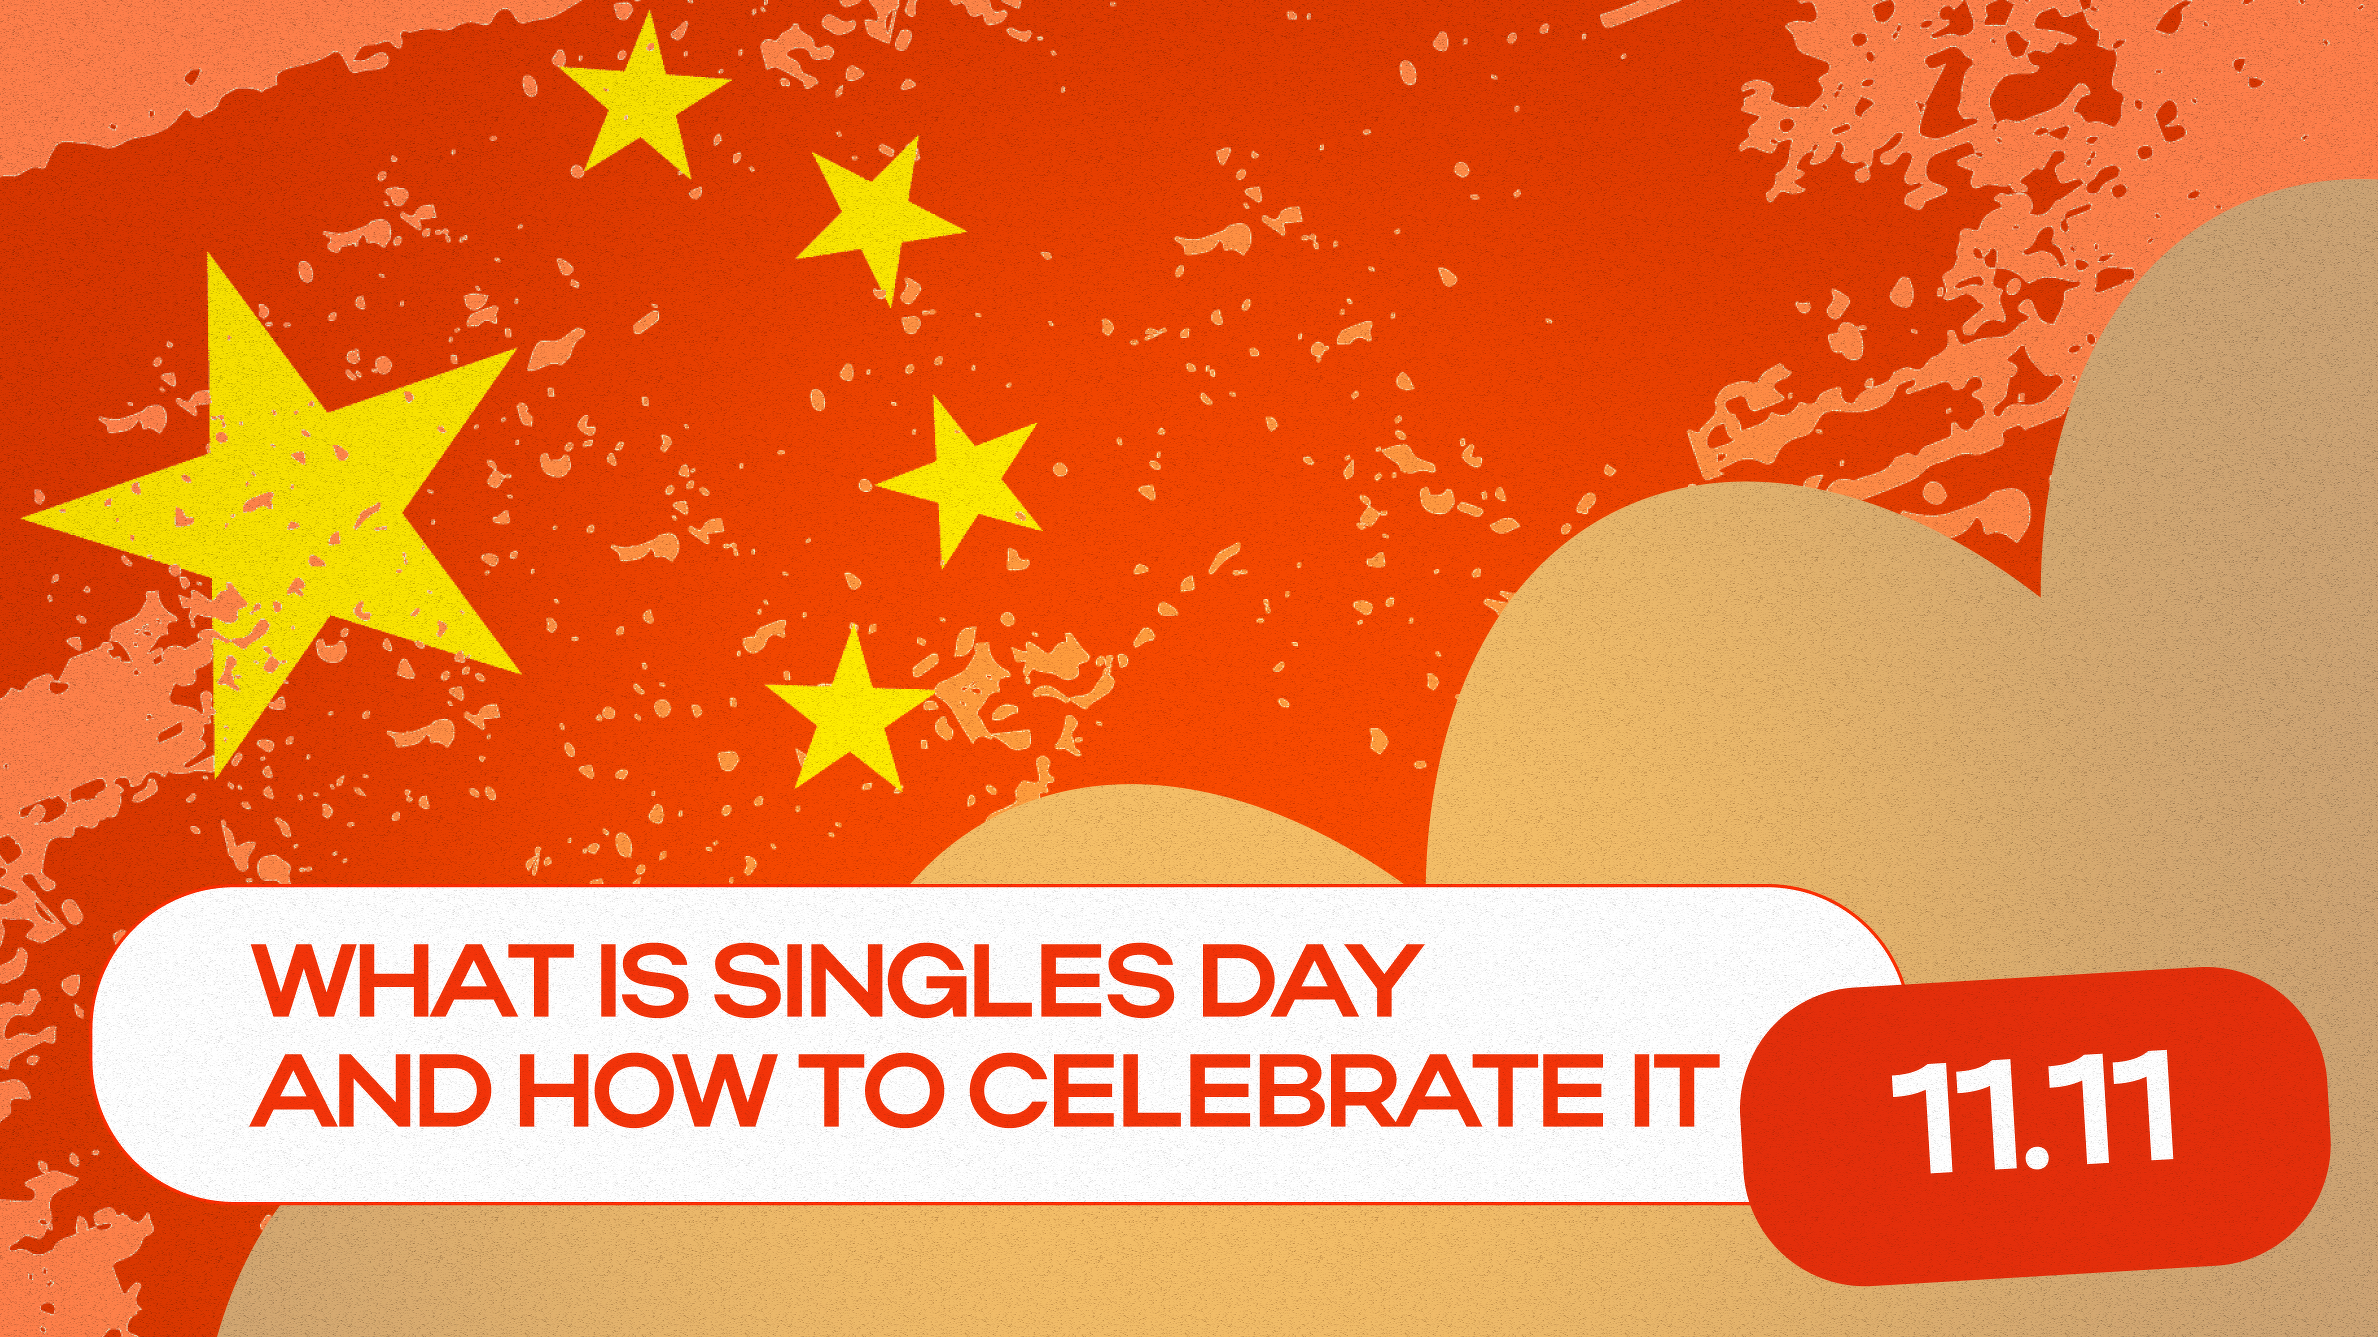 What is Singles Day and how to celebrate it